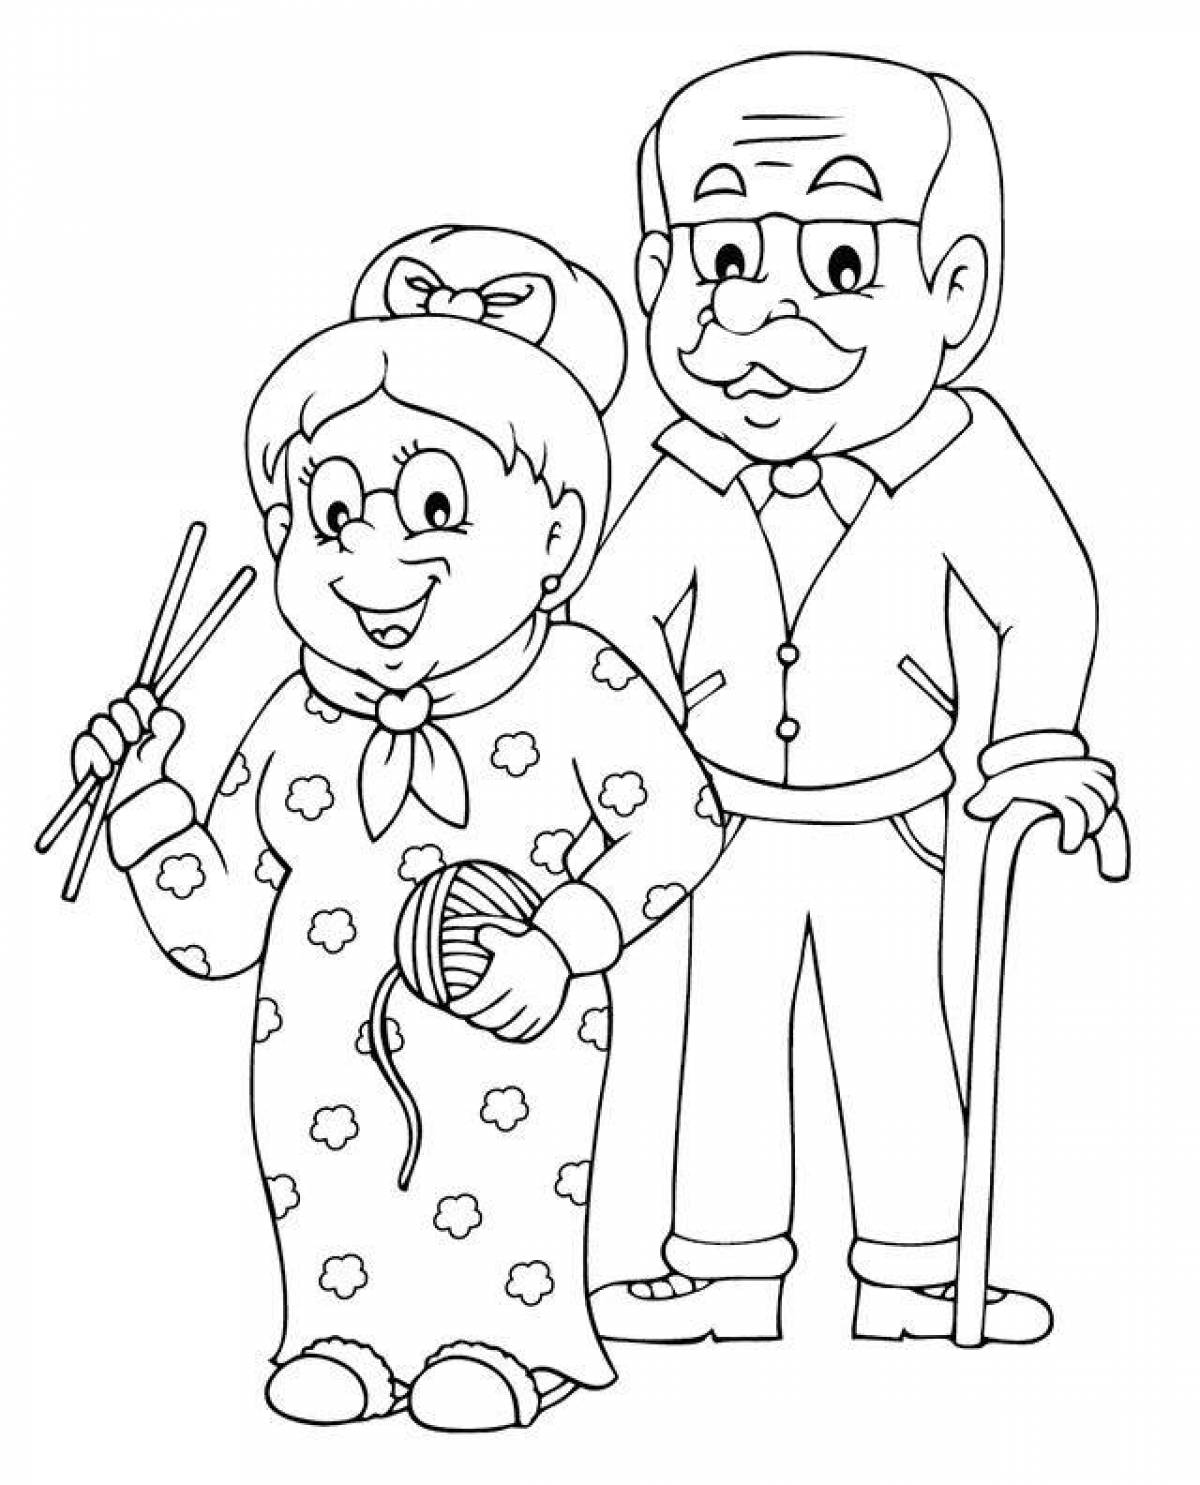 An entertaining coloring book for older people with dementia